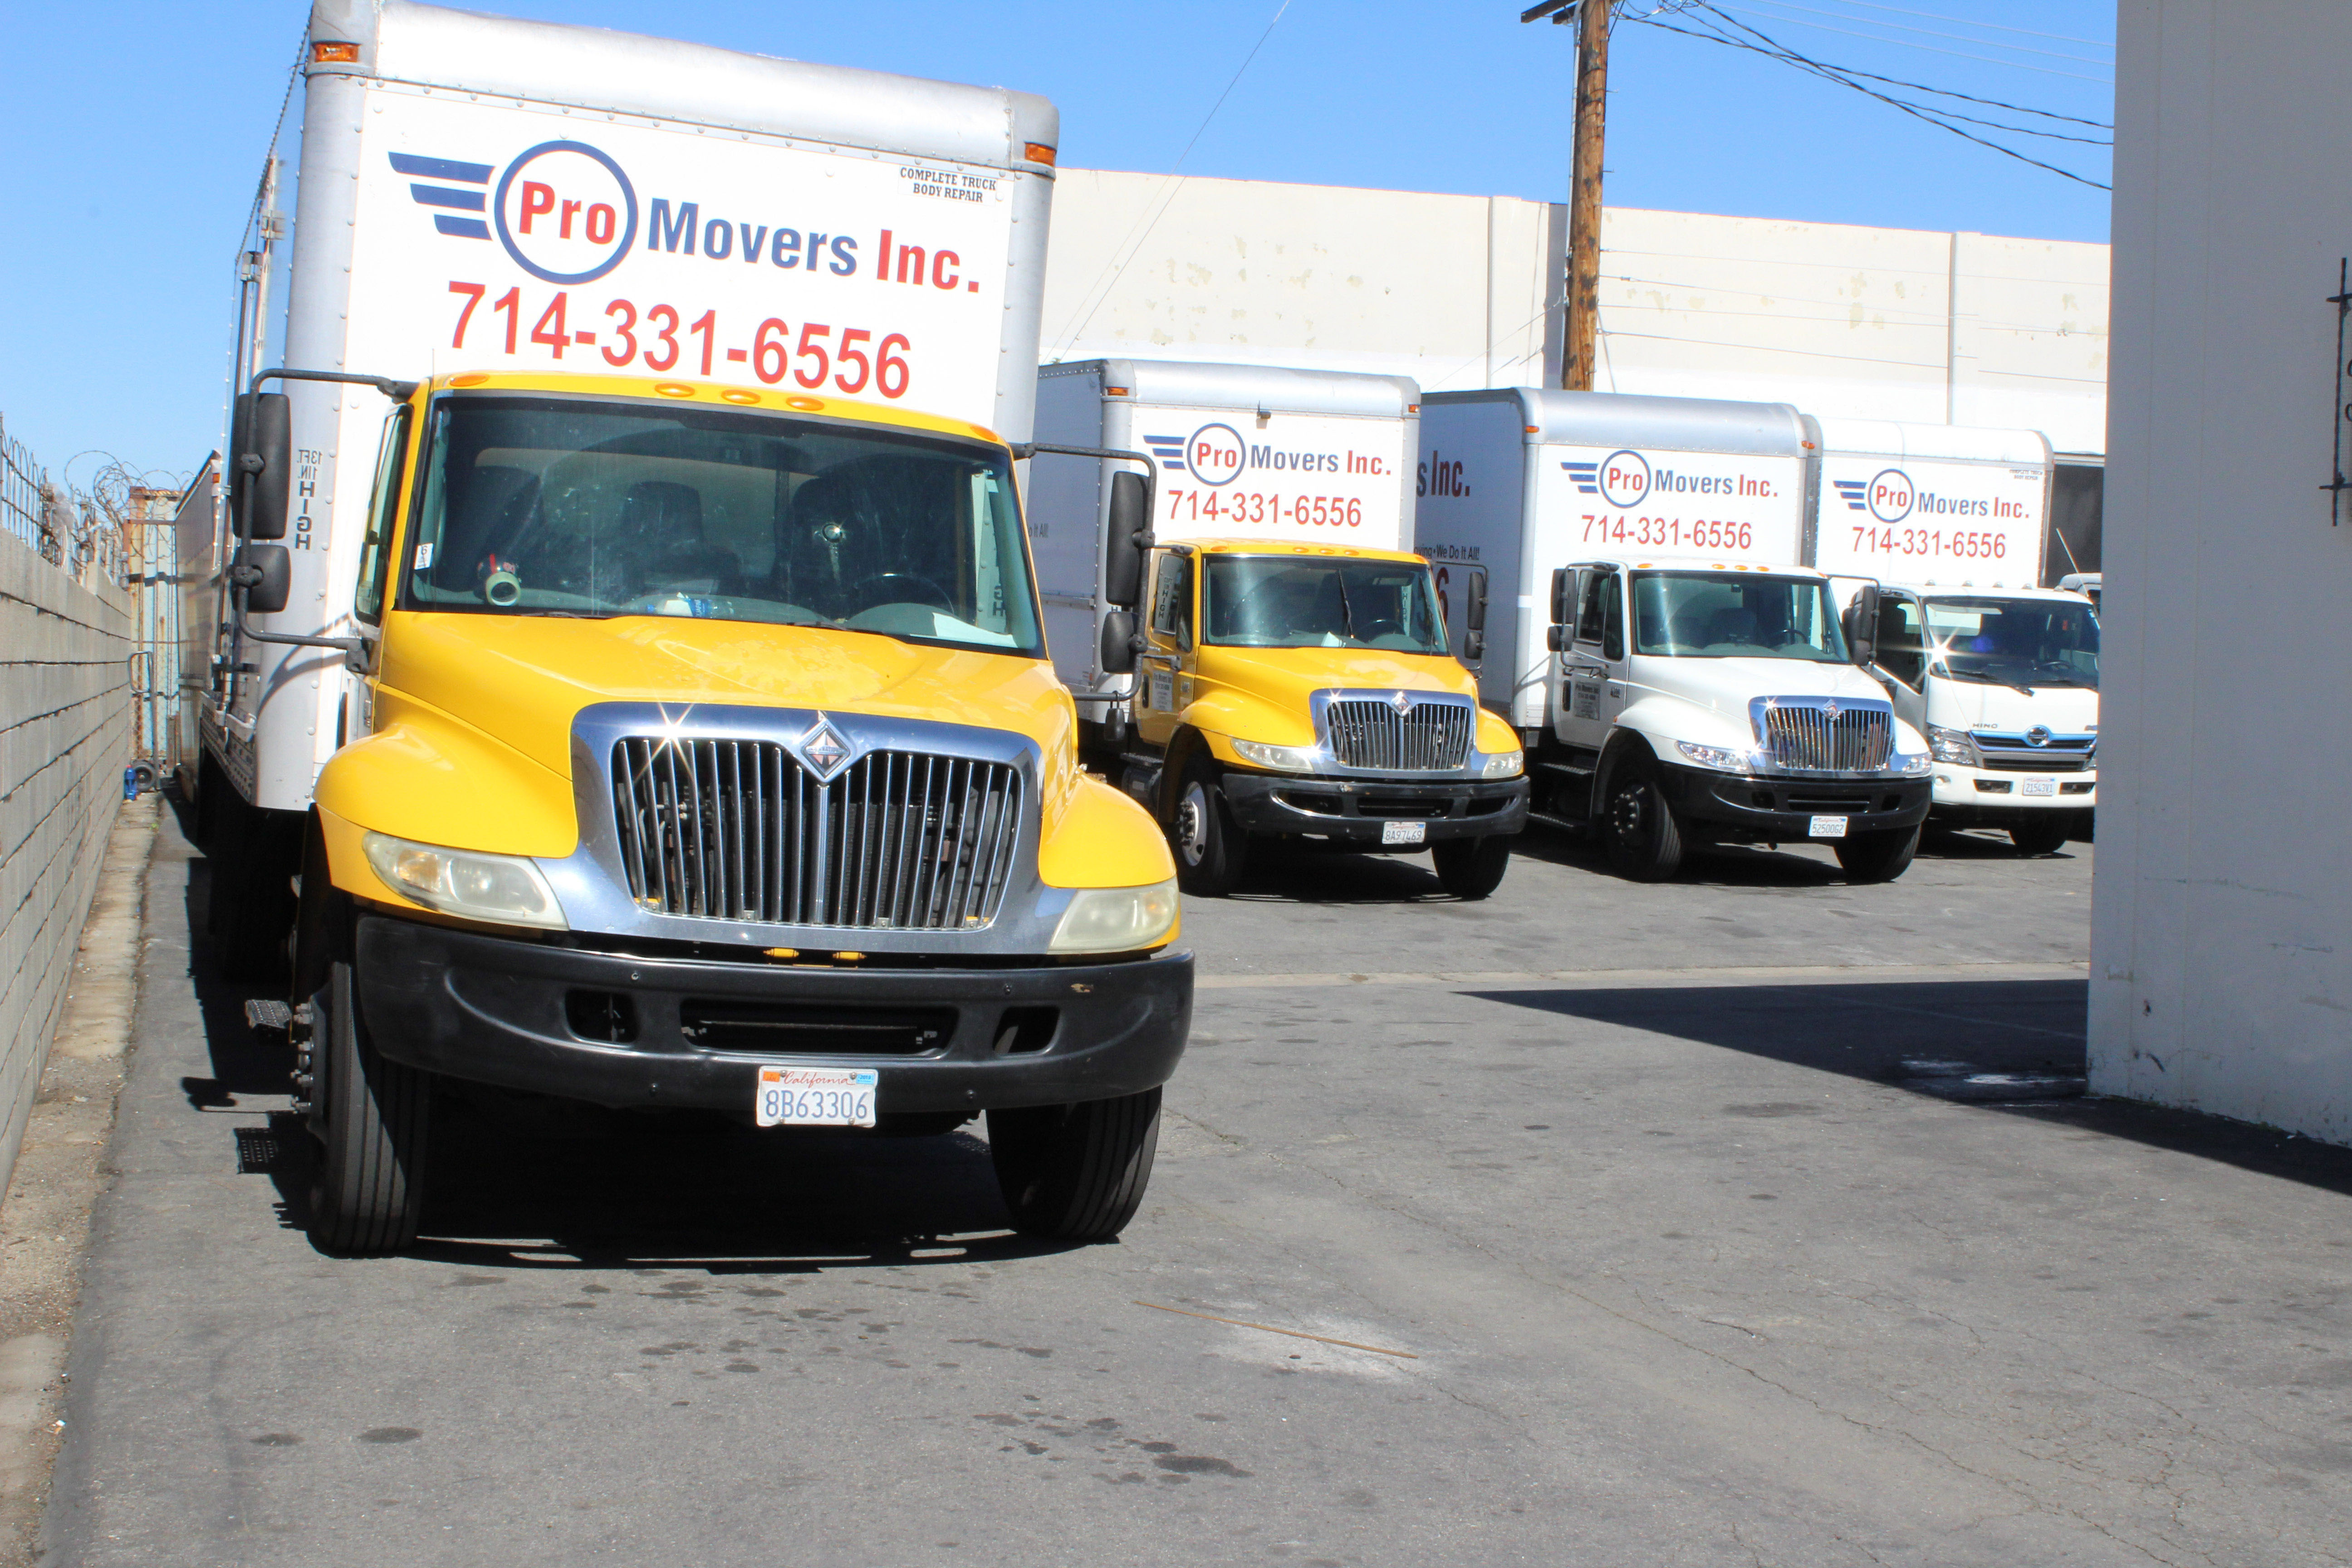 We own twelve trucks to provide you with the best moving experience.